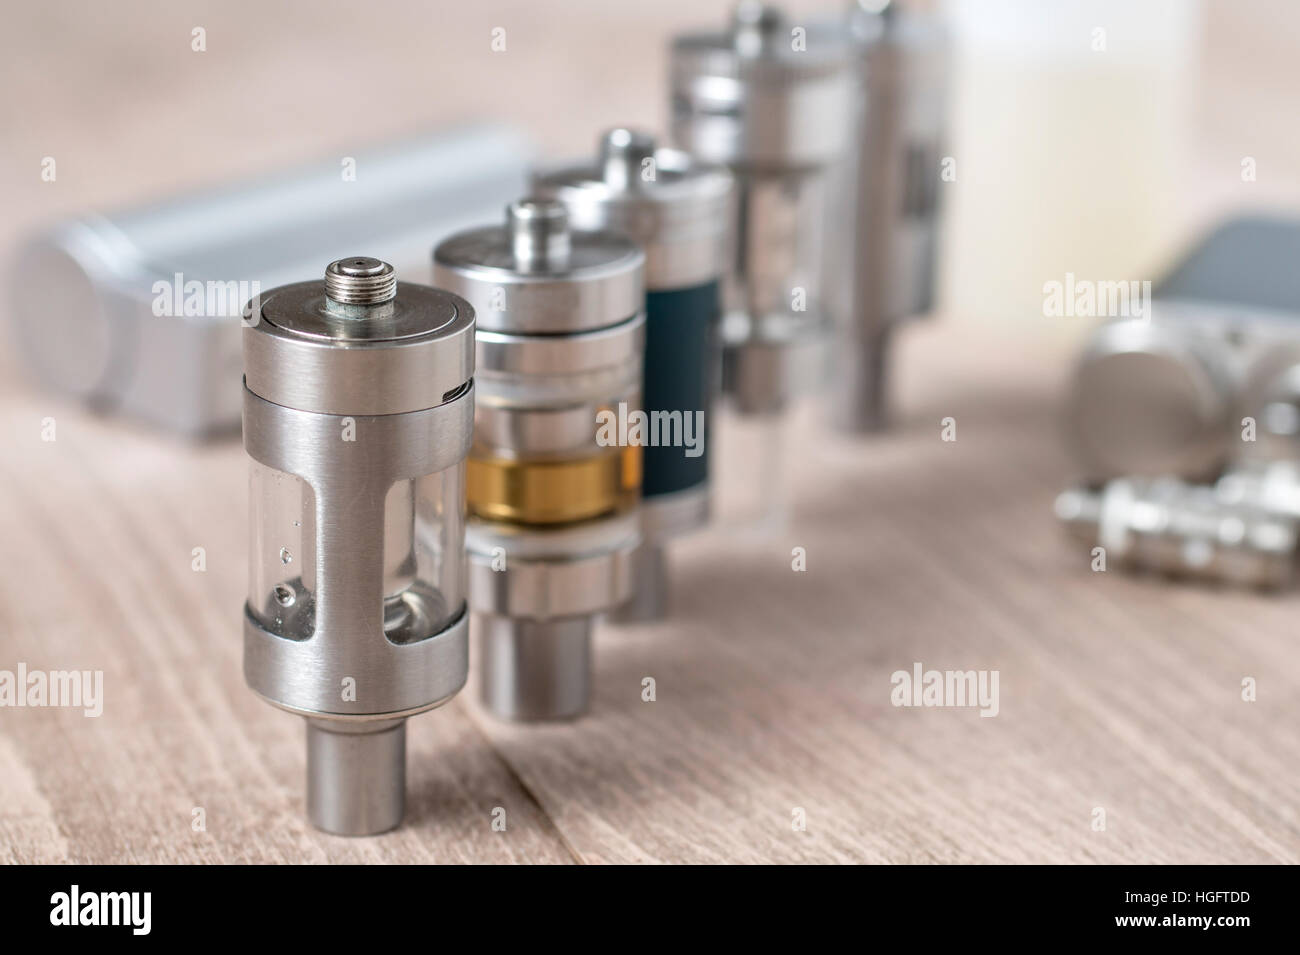 Electronic cigarette Atomizer in close up Stock Photo